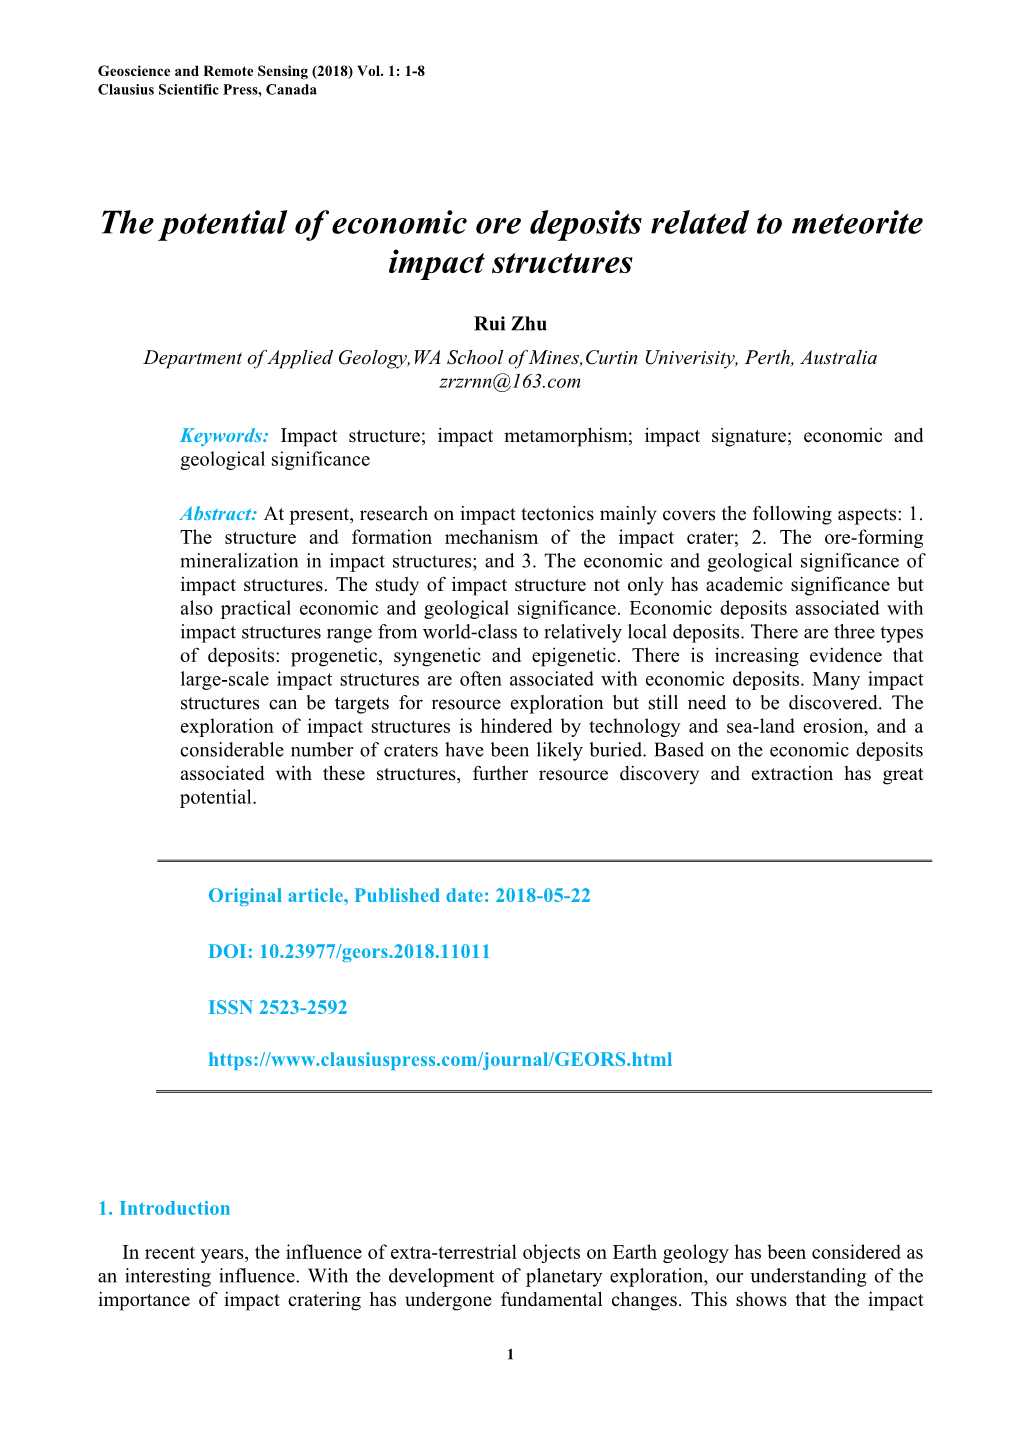 The Potential of Economic Ore Deposits Related to Meteorite Impact Structures